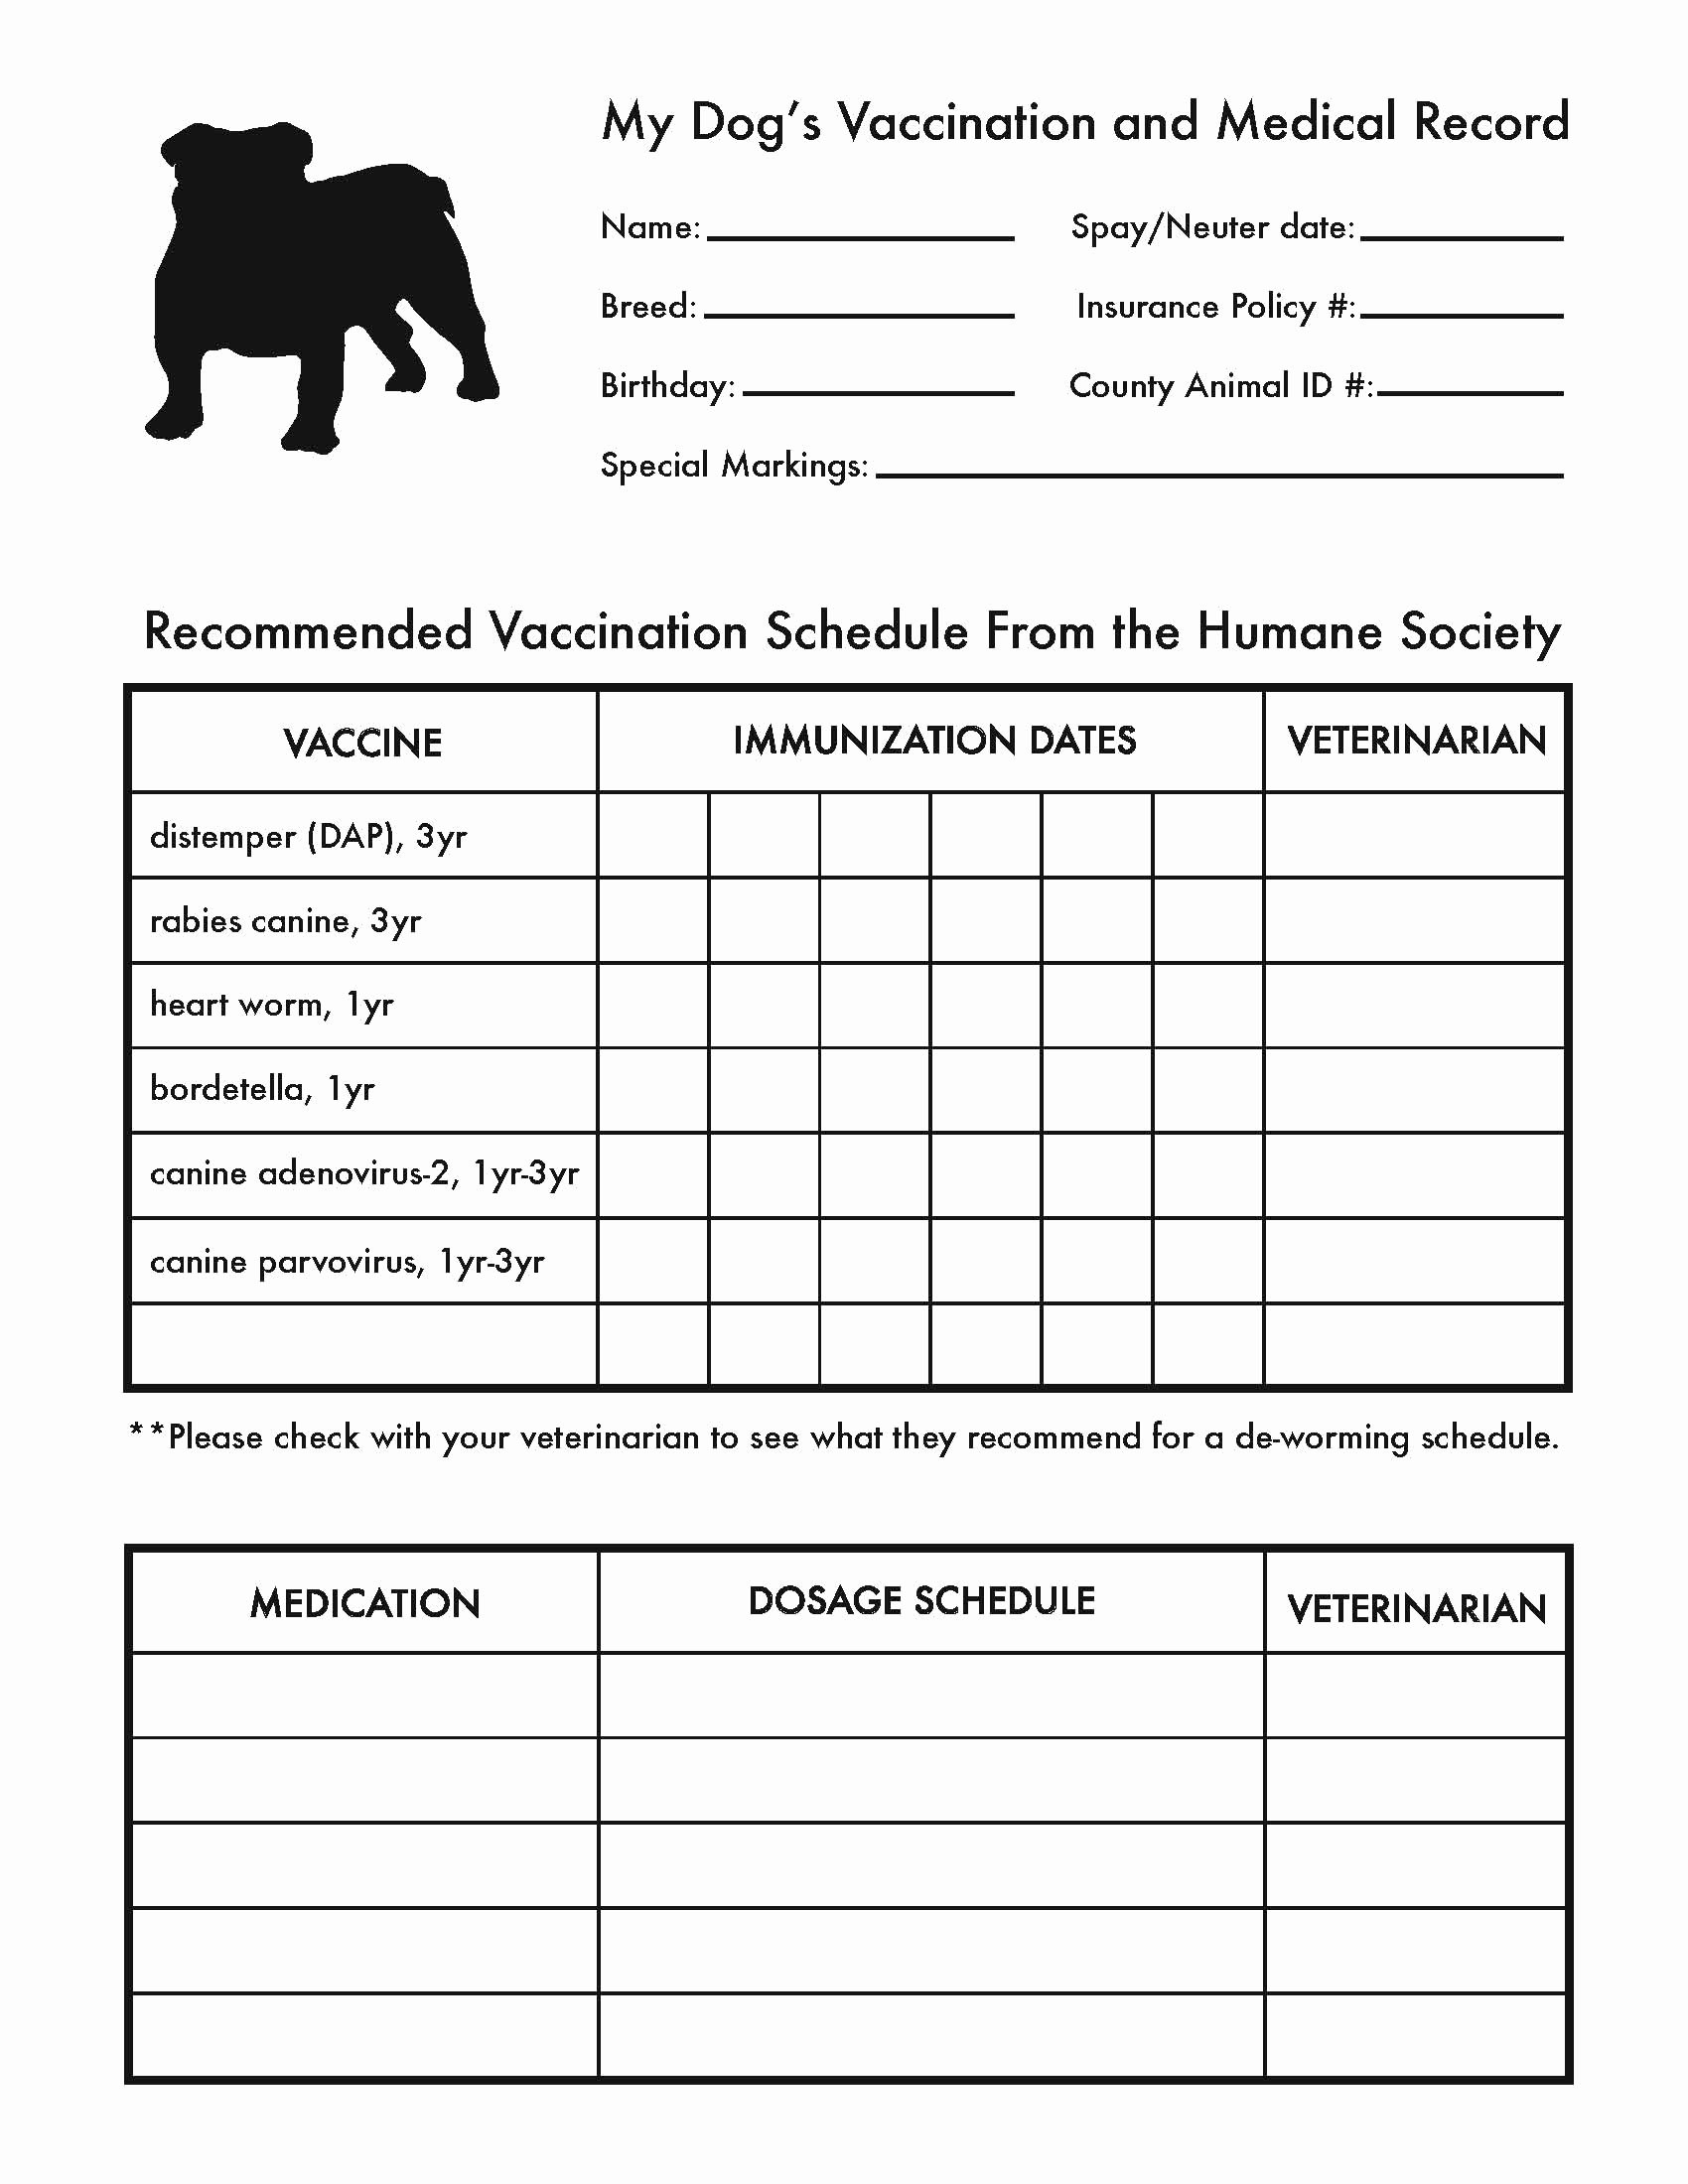 Dog Health Record Template Awesome are Your Pet’s Medical Records organized